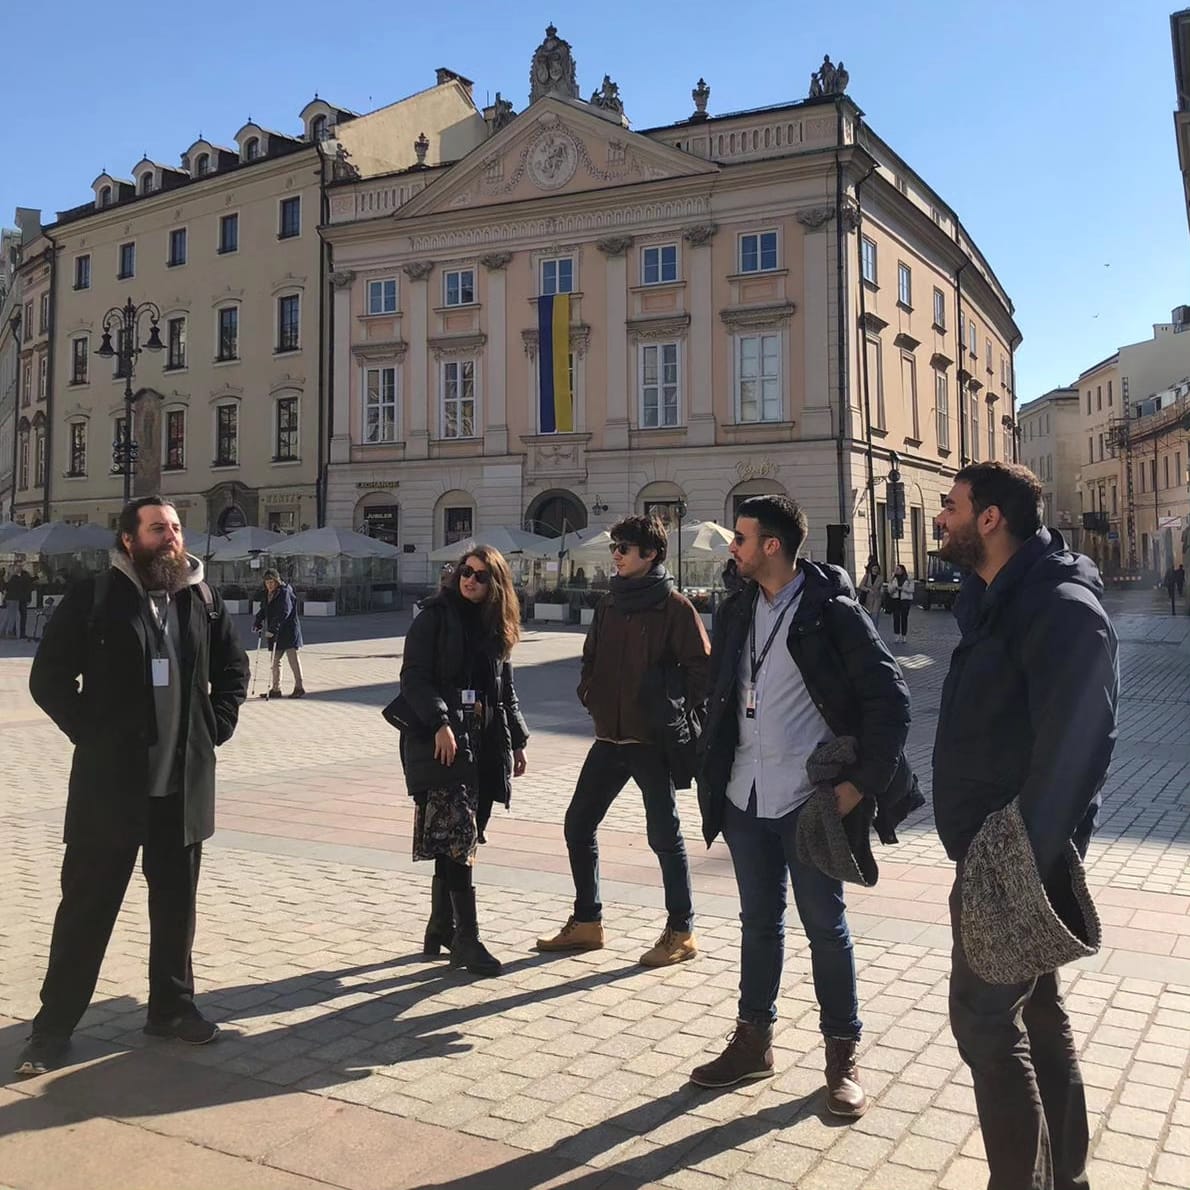 #Anacronia trying to pose on the Market Square in Krakow on 21 March 2022 🍃 

Where will we be on this year's #earlymusicday ??

#earlymusic #concert #haydn #musicaantiga #kraków #poland #misteriapaschalia #music #friends #travelphotography #rynekgłówny #oudemuziek